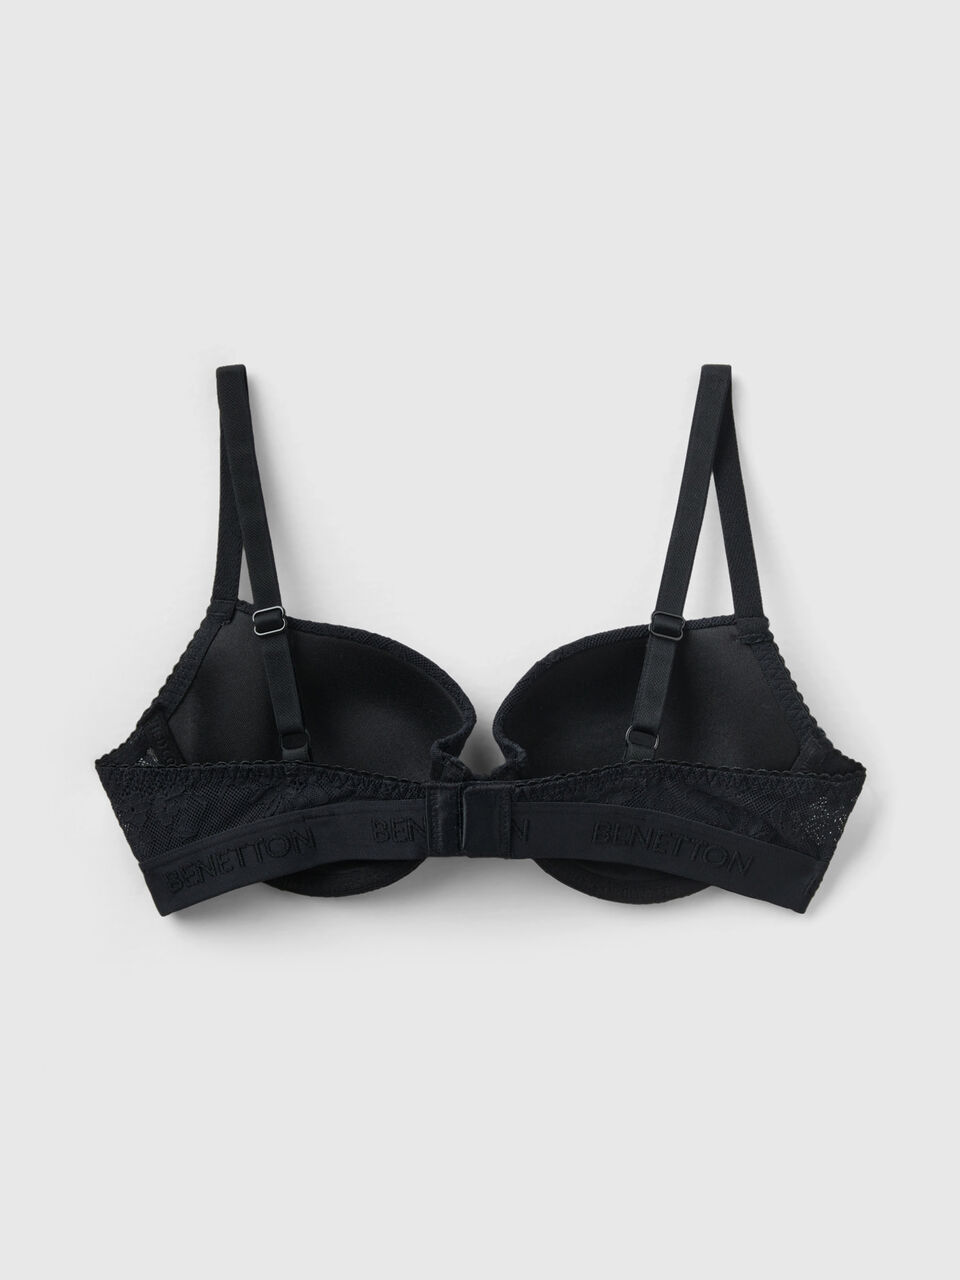 Essentials868 - ‼️NEW ARRIVALS‼️ B Cup Bras Material :95% polyester 5%  spandex. Size : 32B-34B-36B-38B Price :$40 for 1 ..3 for $110 Delivery  available 🚚 - Message us to Order! . #essentials868 #acupbra #bra  #braandpantyset #lingerie